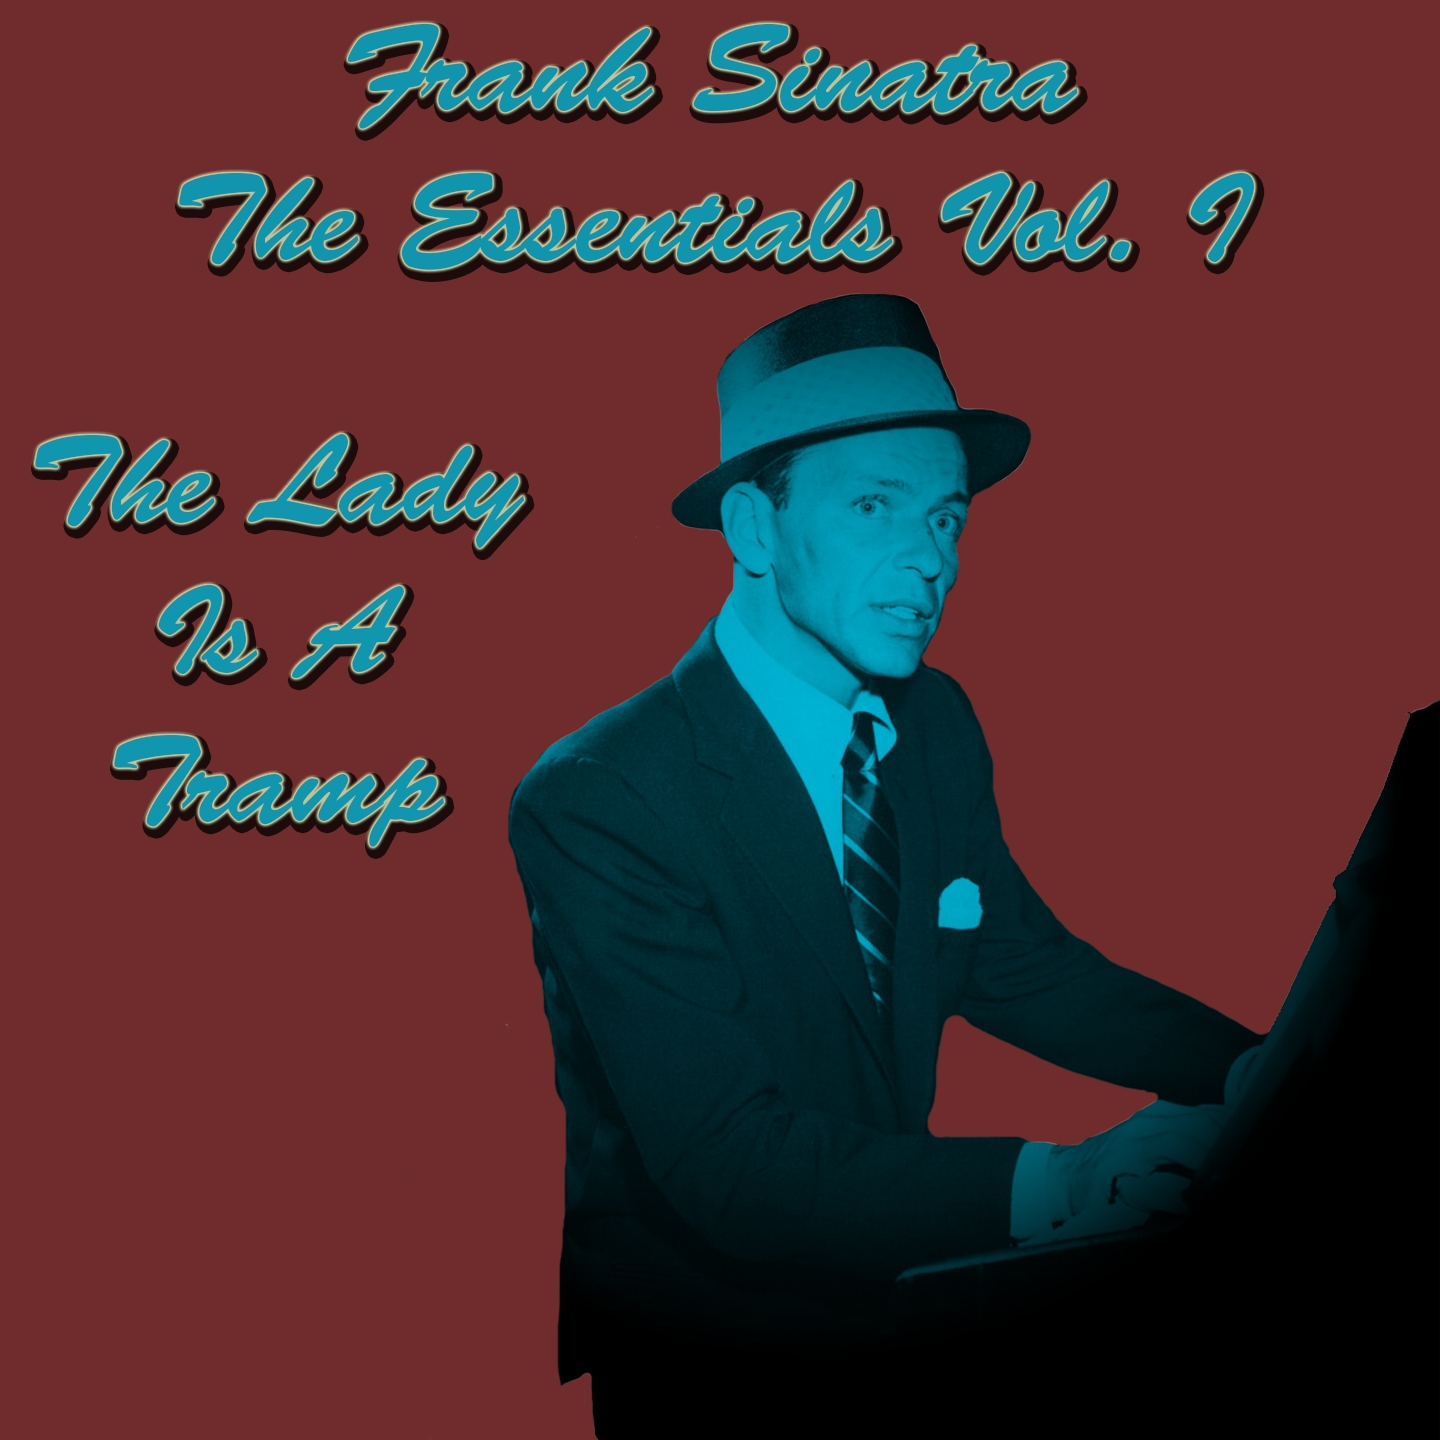 Frank Sinatra The Essentials Vol. I: The Lady Is A Tramp